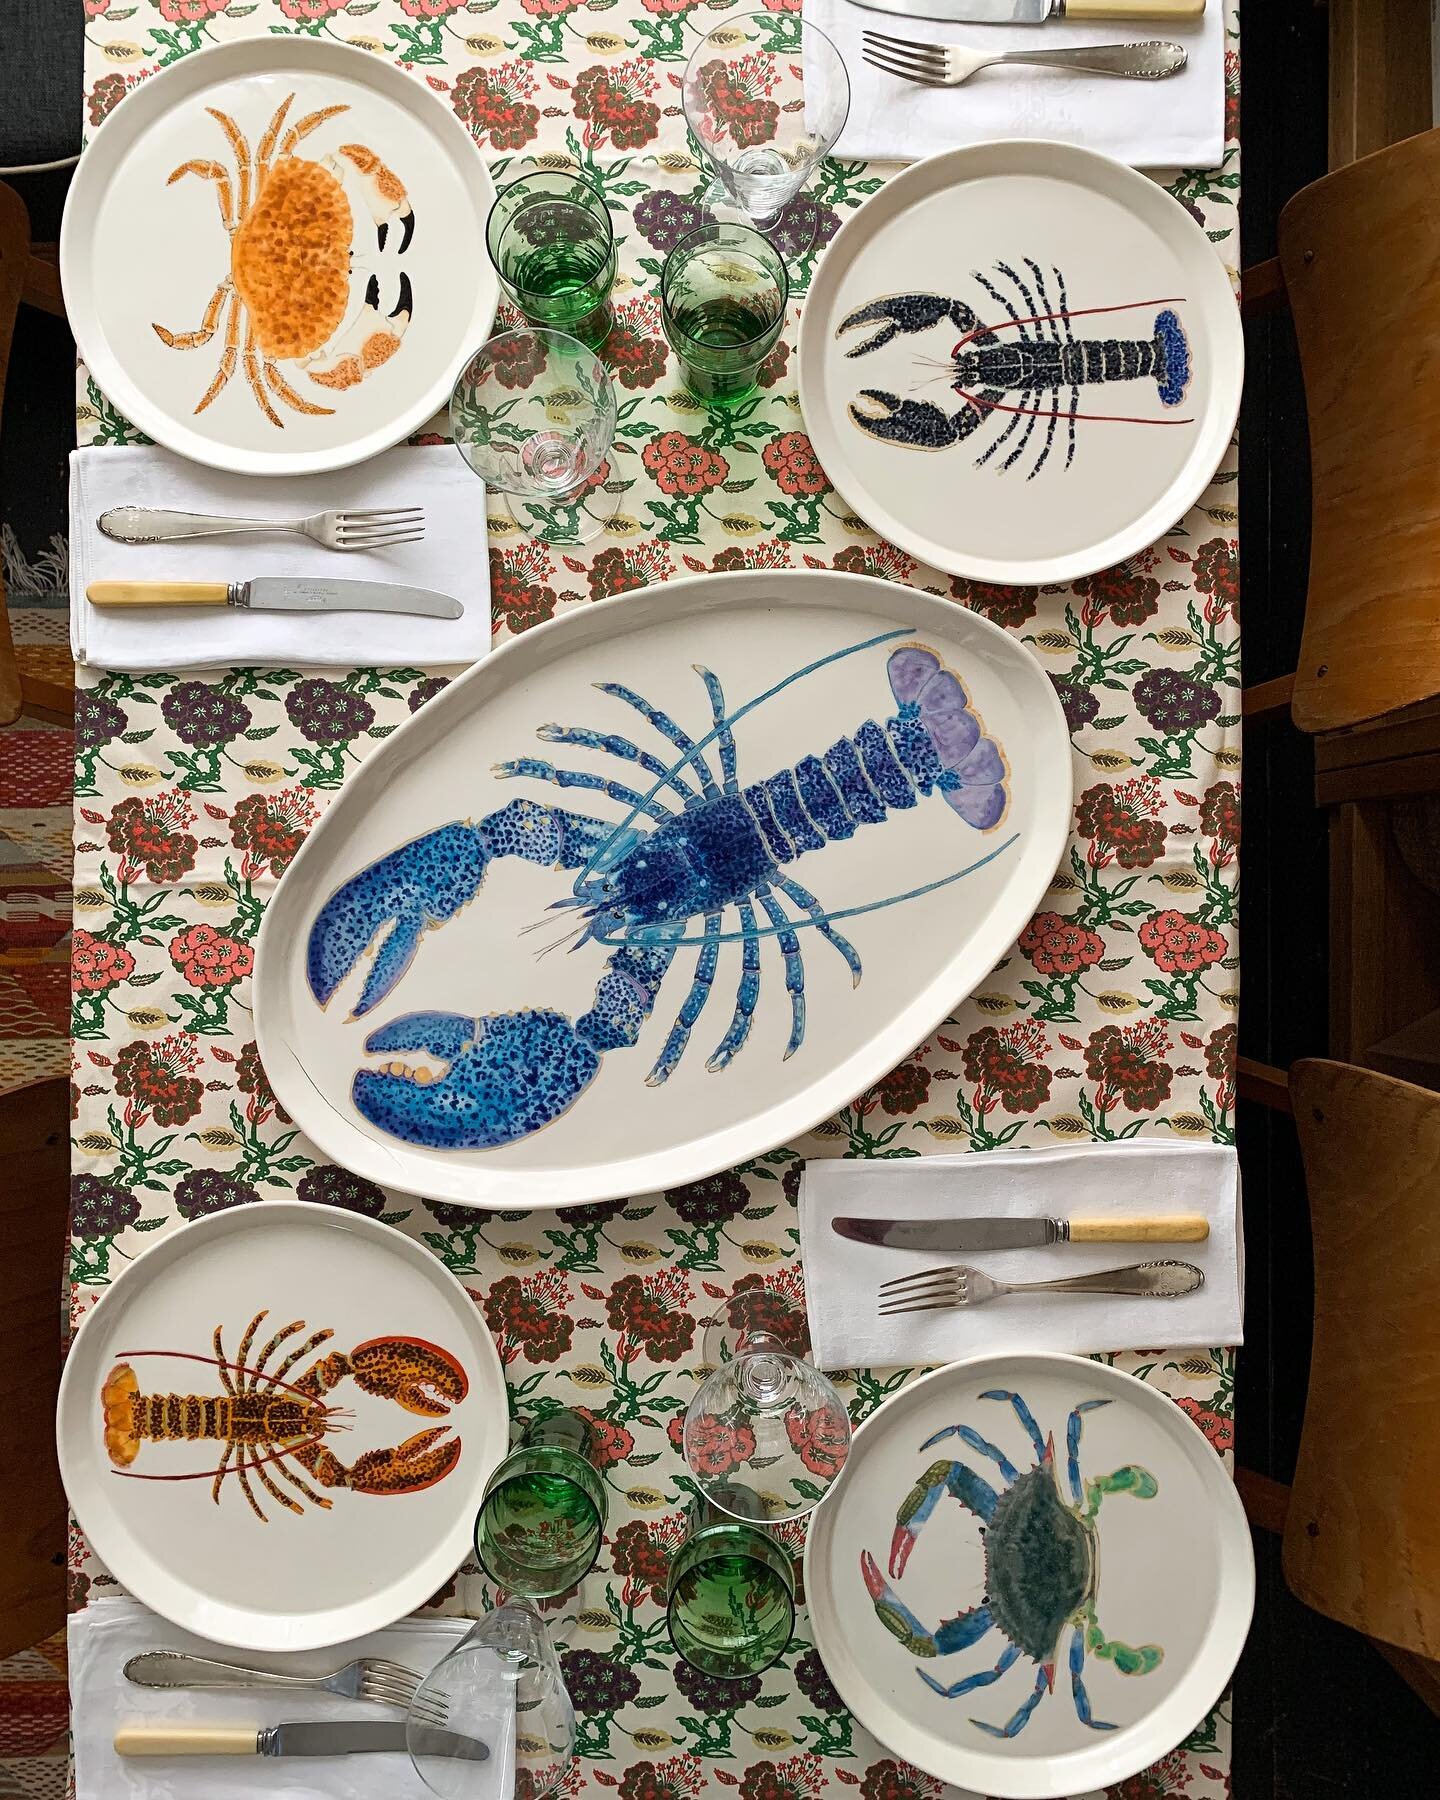 If you&rsquo;ve been following my work for a while, you will probably know that the blue Maine Lobster (pictured in the middle) is very rare, with about 1 found in every 2 million. But what if I told you there is even a rarer variety of lobster? 

Wi